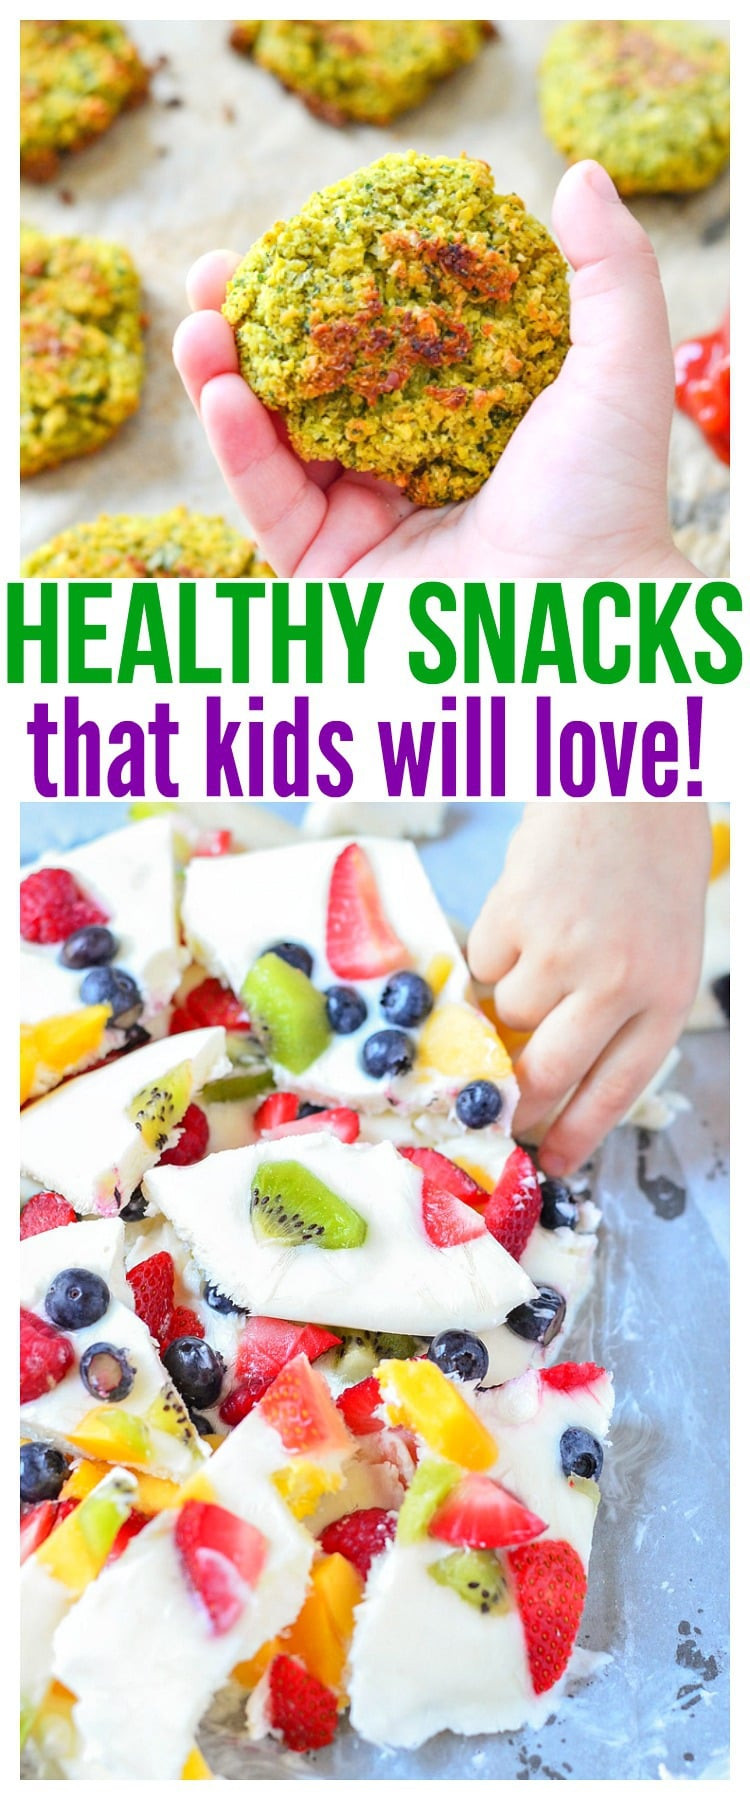 Healthy Fun Snacks For Kids
 Healthy Snacks for Kids Courtney s Sweets